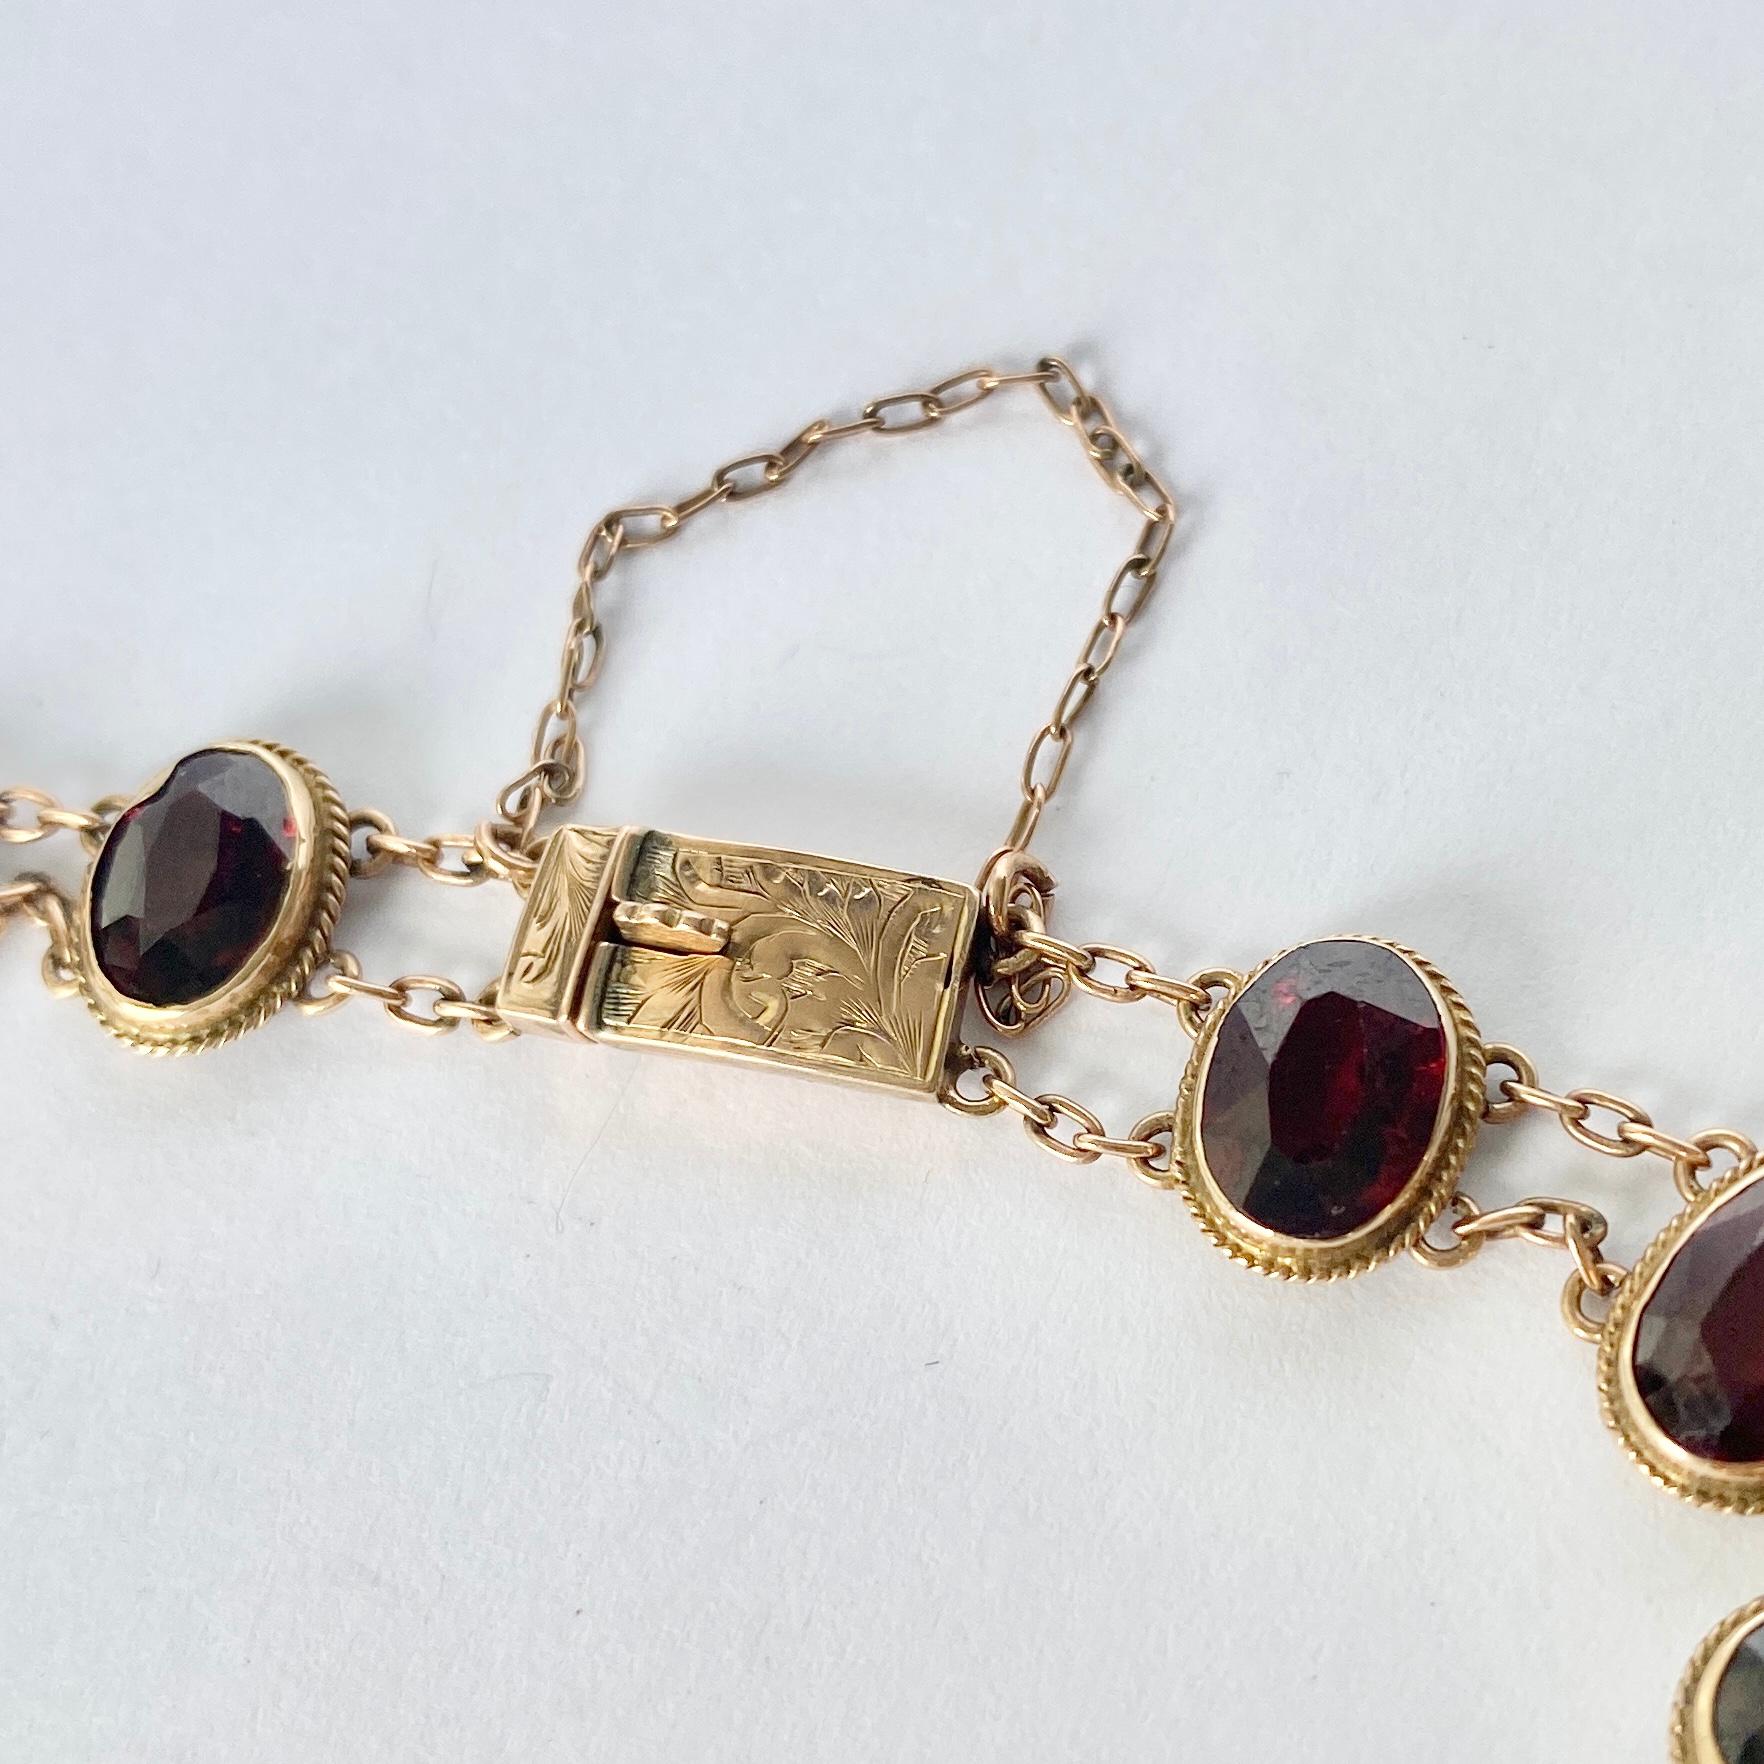 Set in this 9carat gold bracelet are 13 gorgeous red garnet stones. The stones are deep red and when the light hits the stones they have a bright glow. 

Length: 18.5cm
Stone Dimensions: 8x6mm

Weight: 8.1g